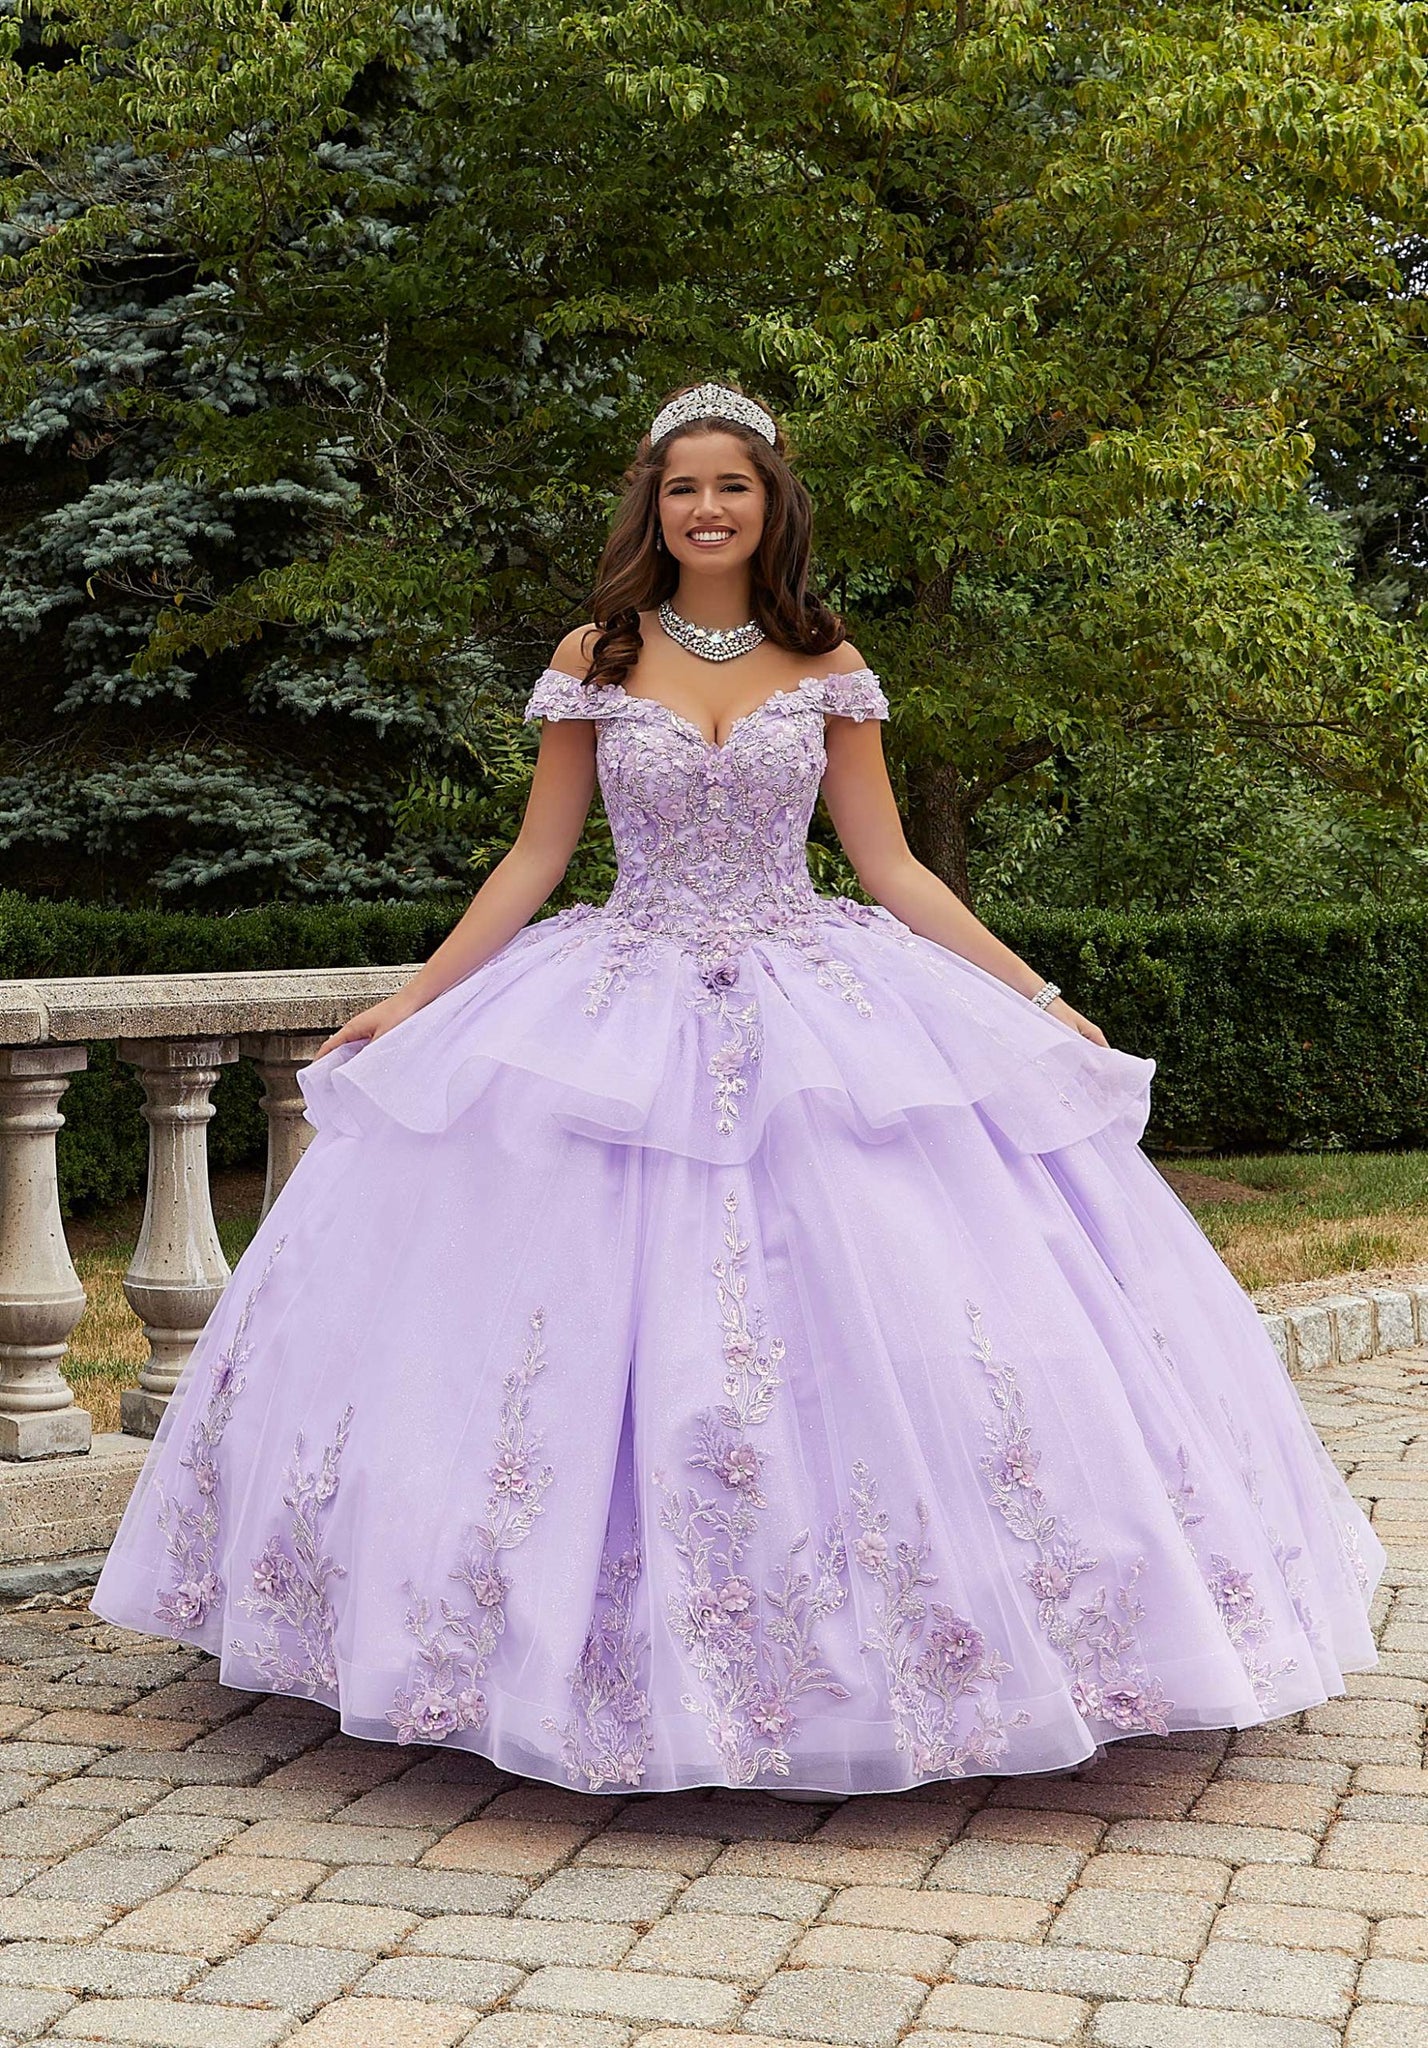 Three-Dimensional Floral Quinceañera Dress with Flounced Overskirt